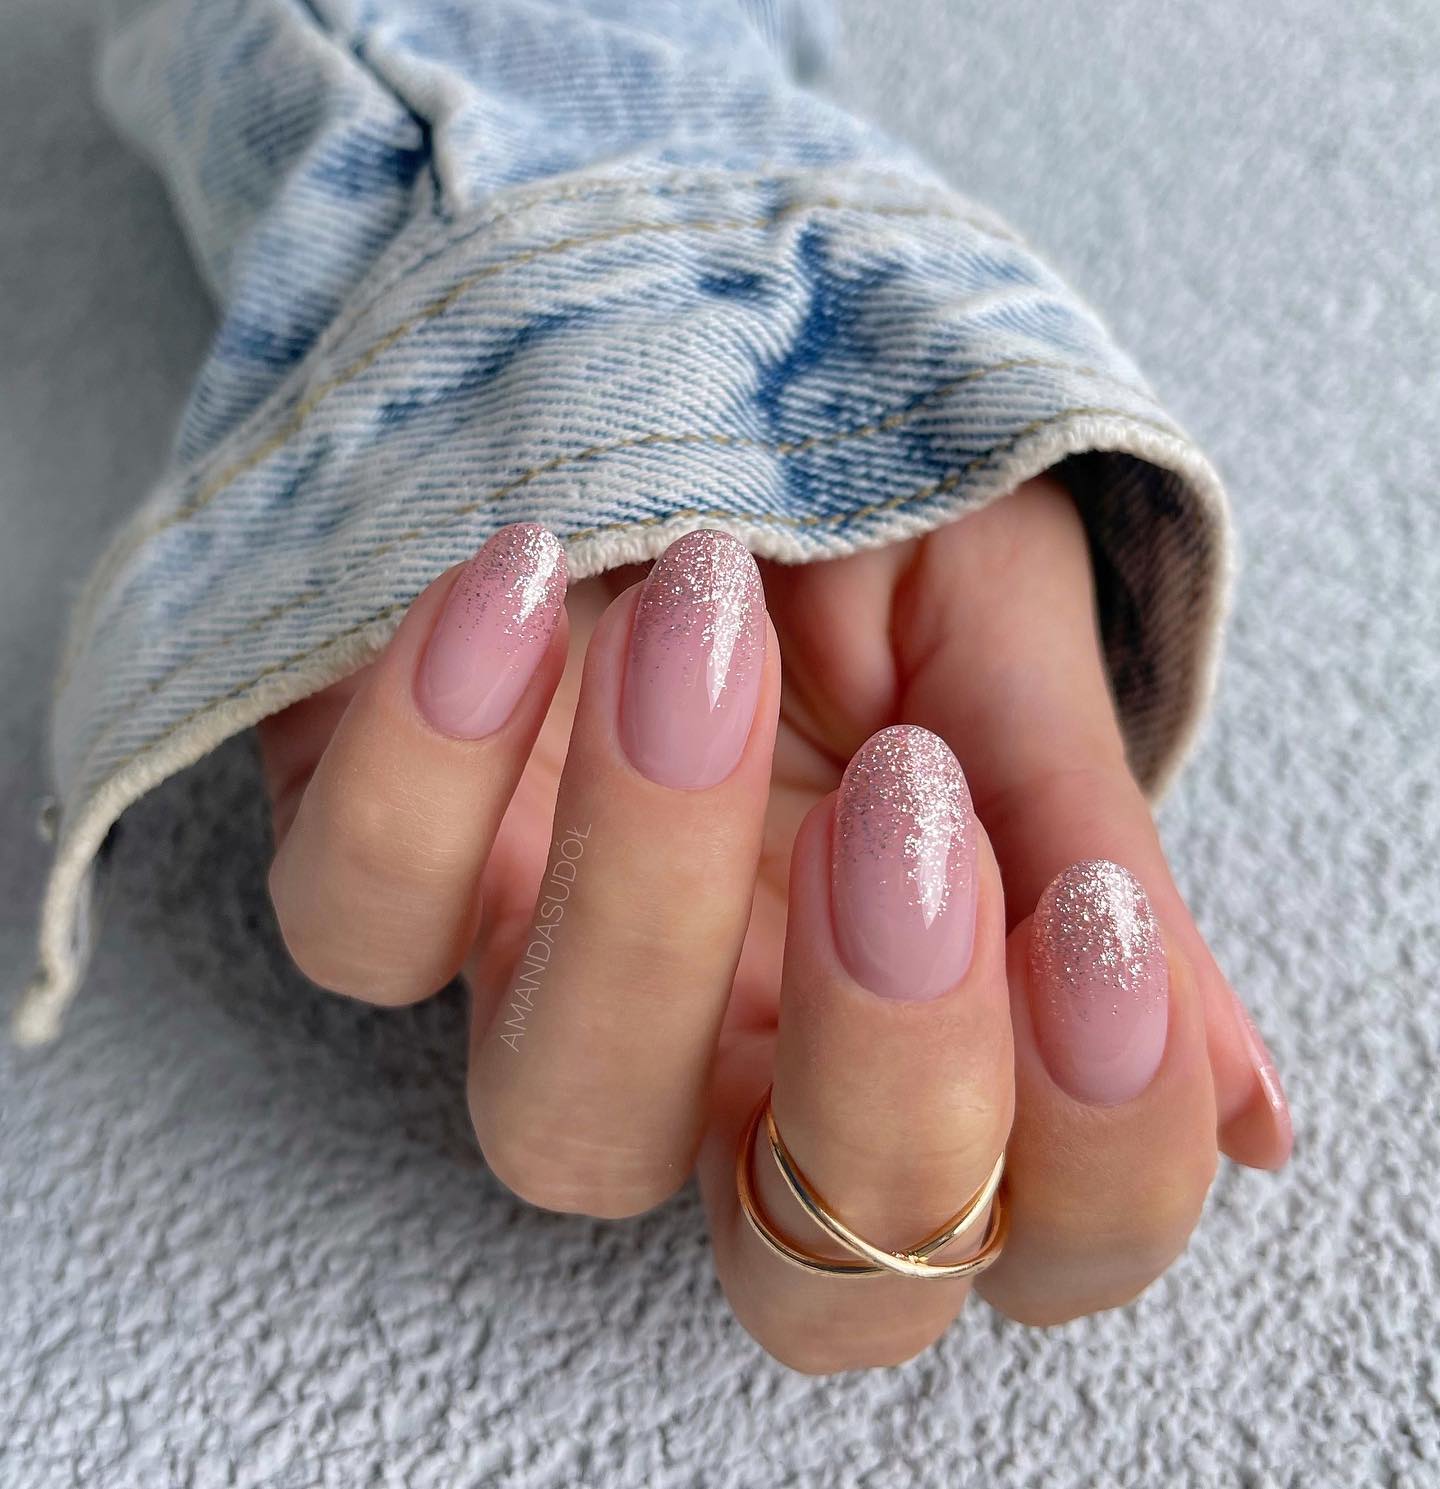 French Ombre Nails With Glitter - 37 Manicure Ideas Not Just For Christmas